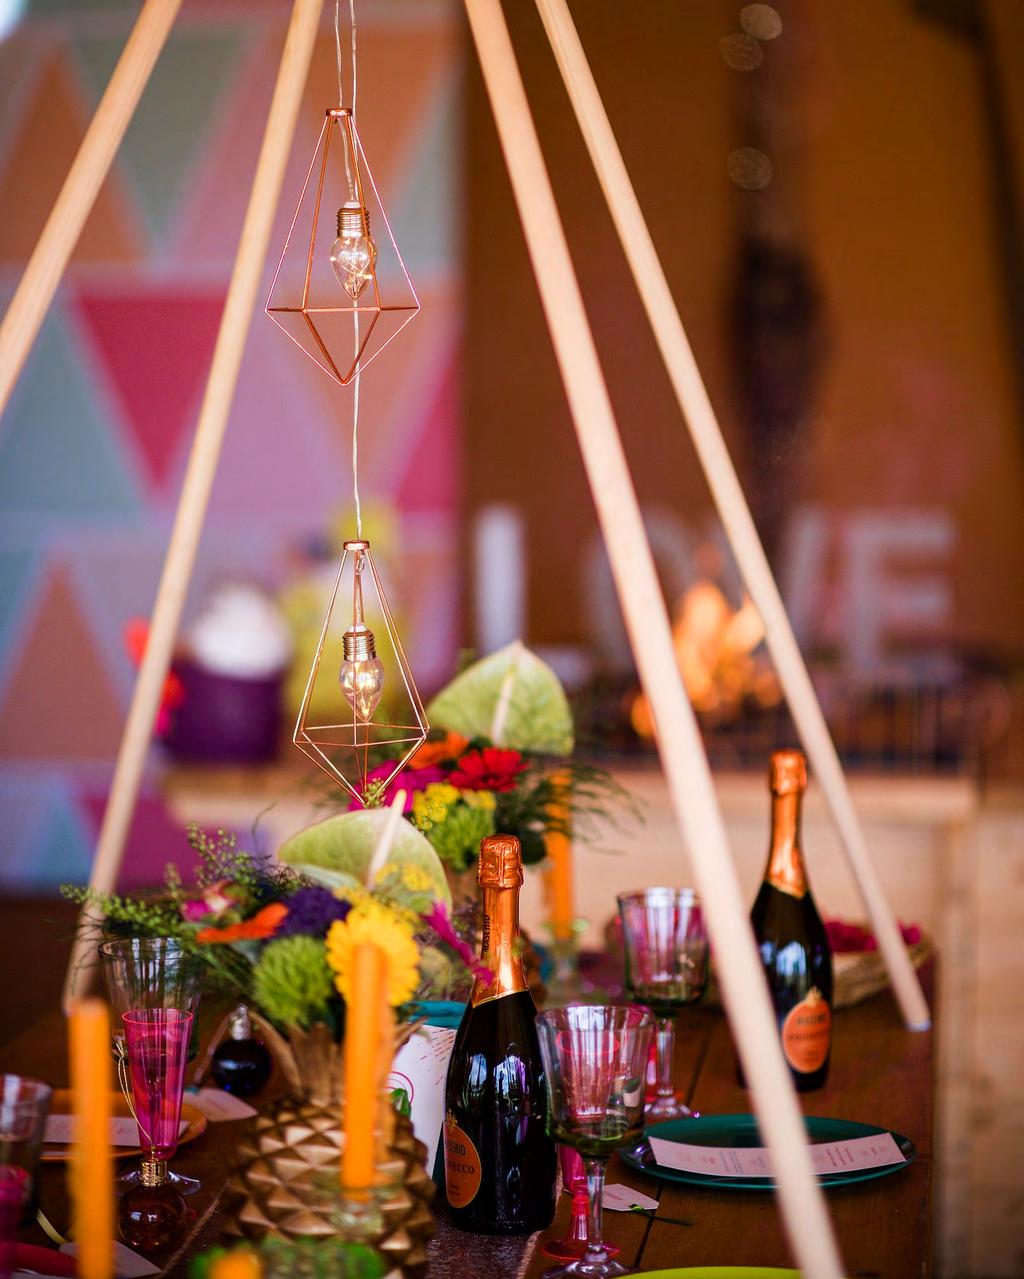 Event Planning... We completely understand how overwhelming planning a tipi event can be...after all, we've been there ourselves!